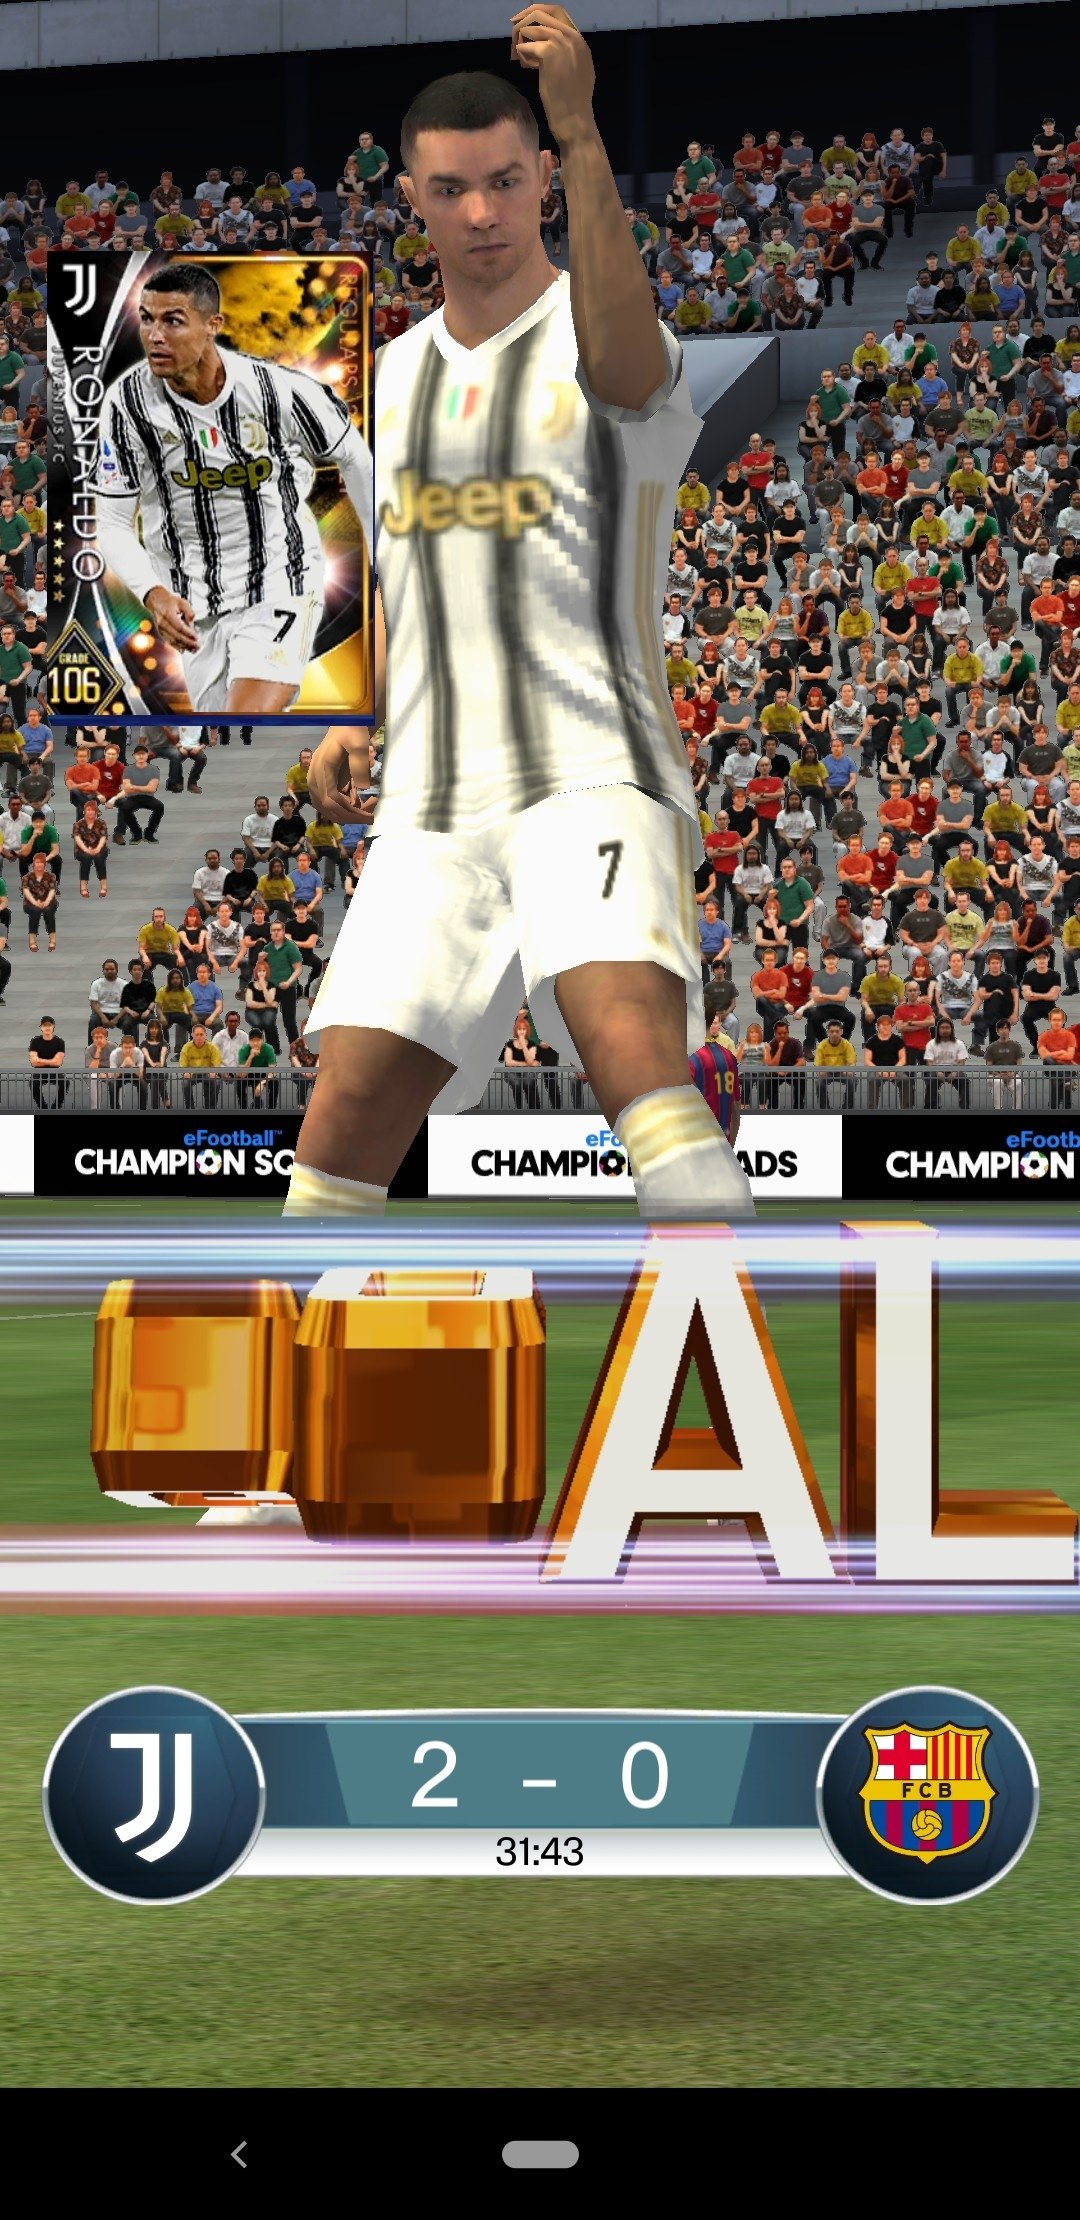 pes 2010 android apk